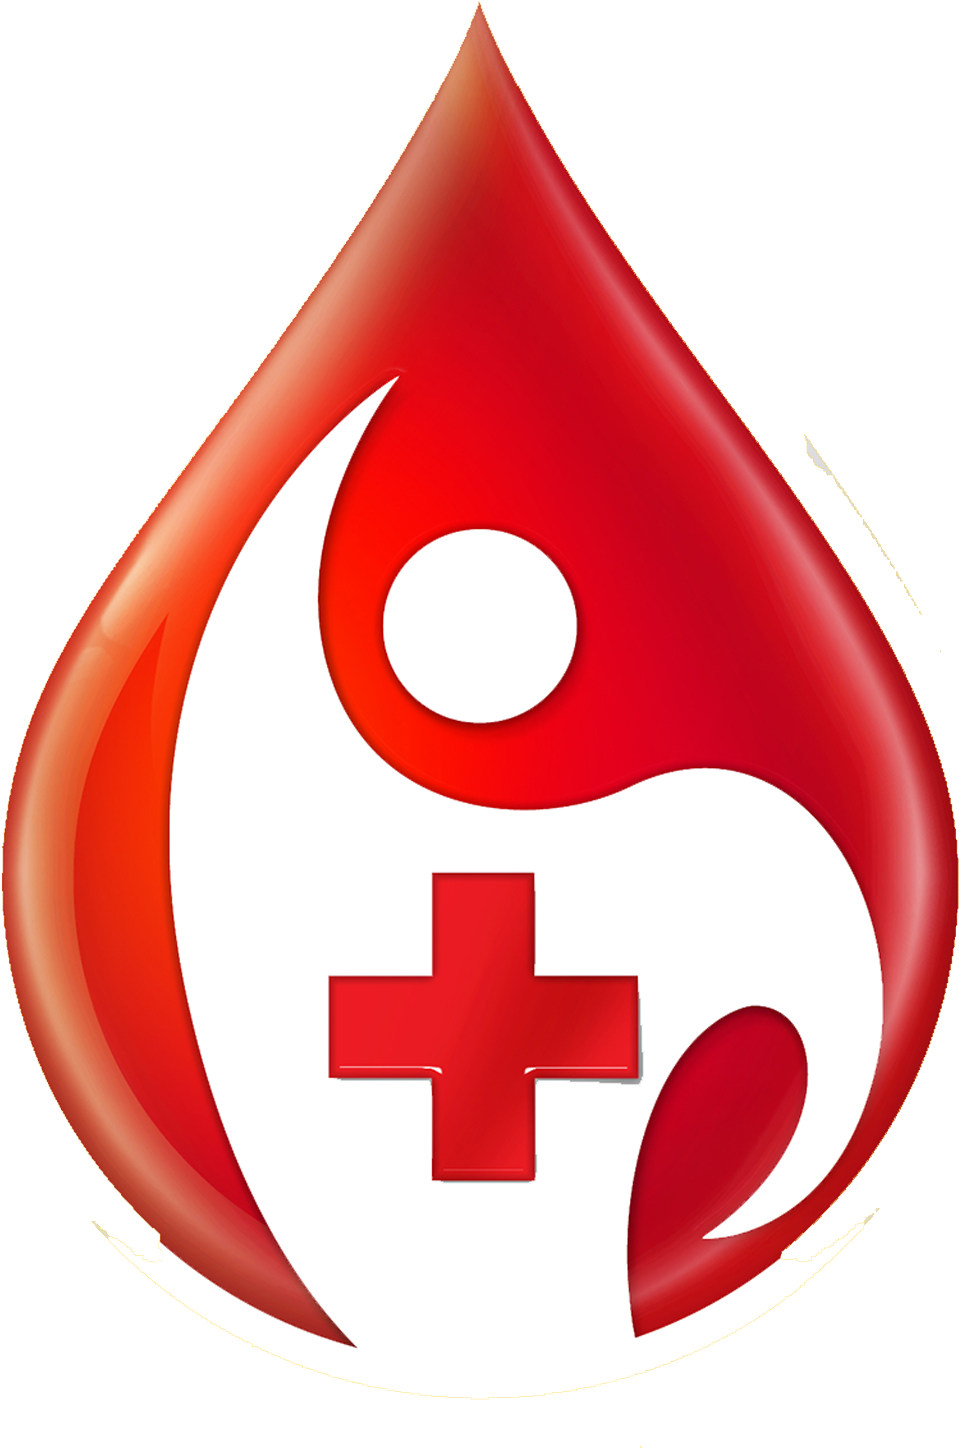 Blood Donation PNG Image Background